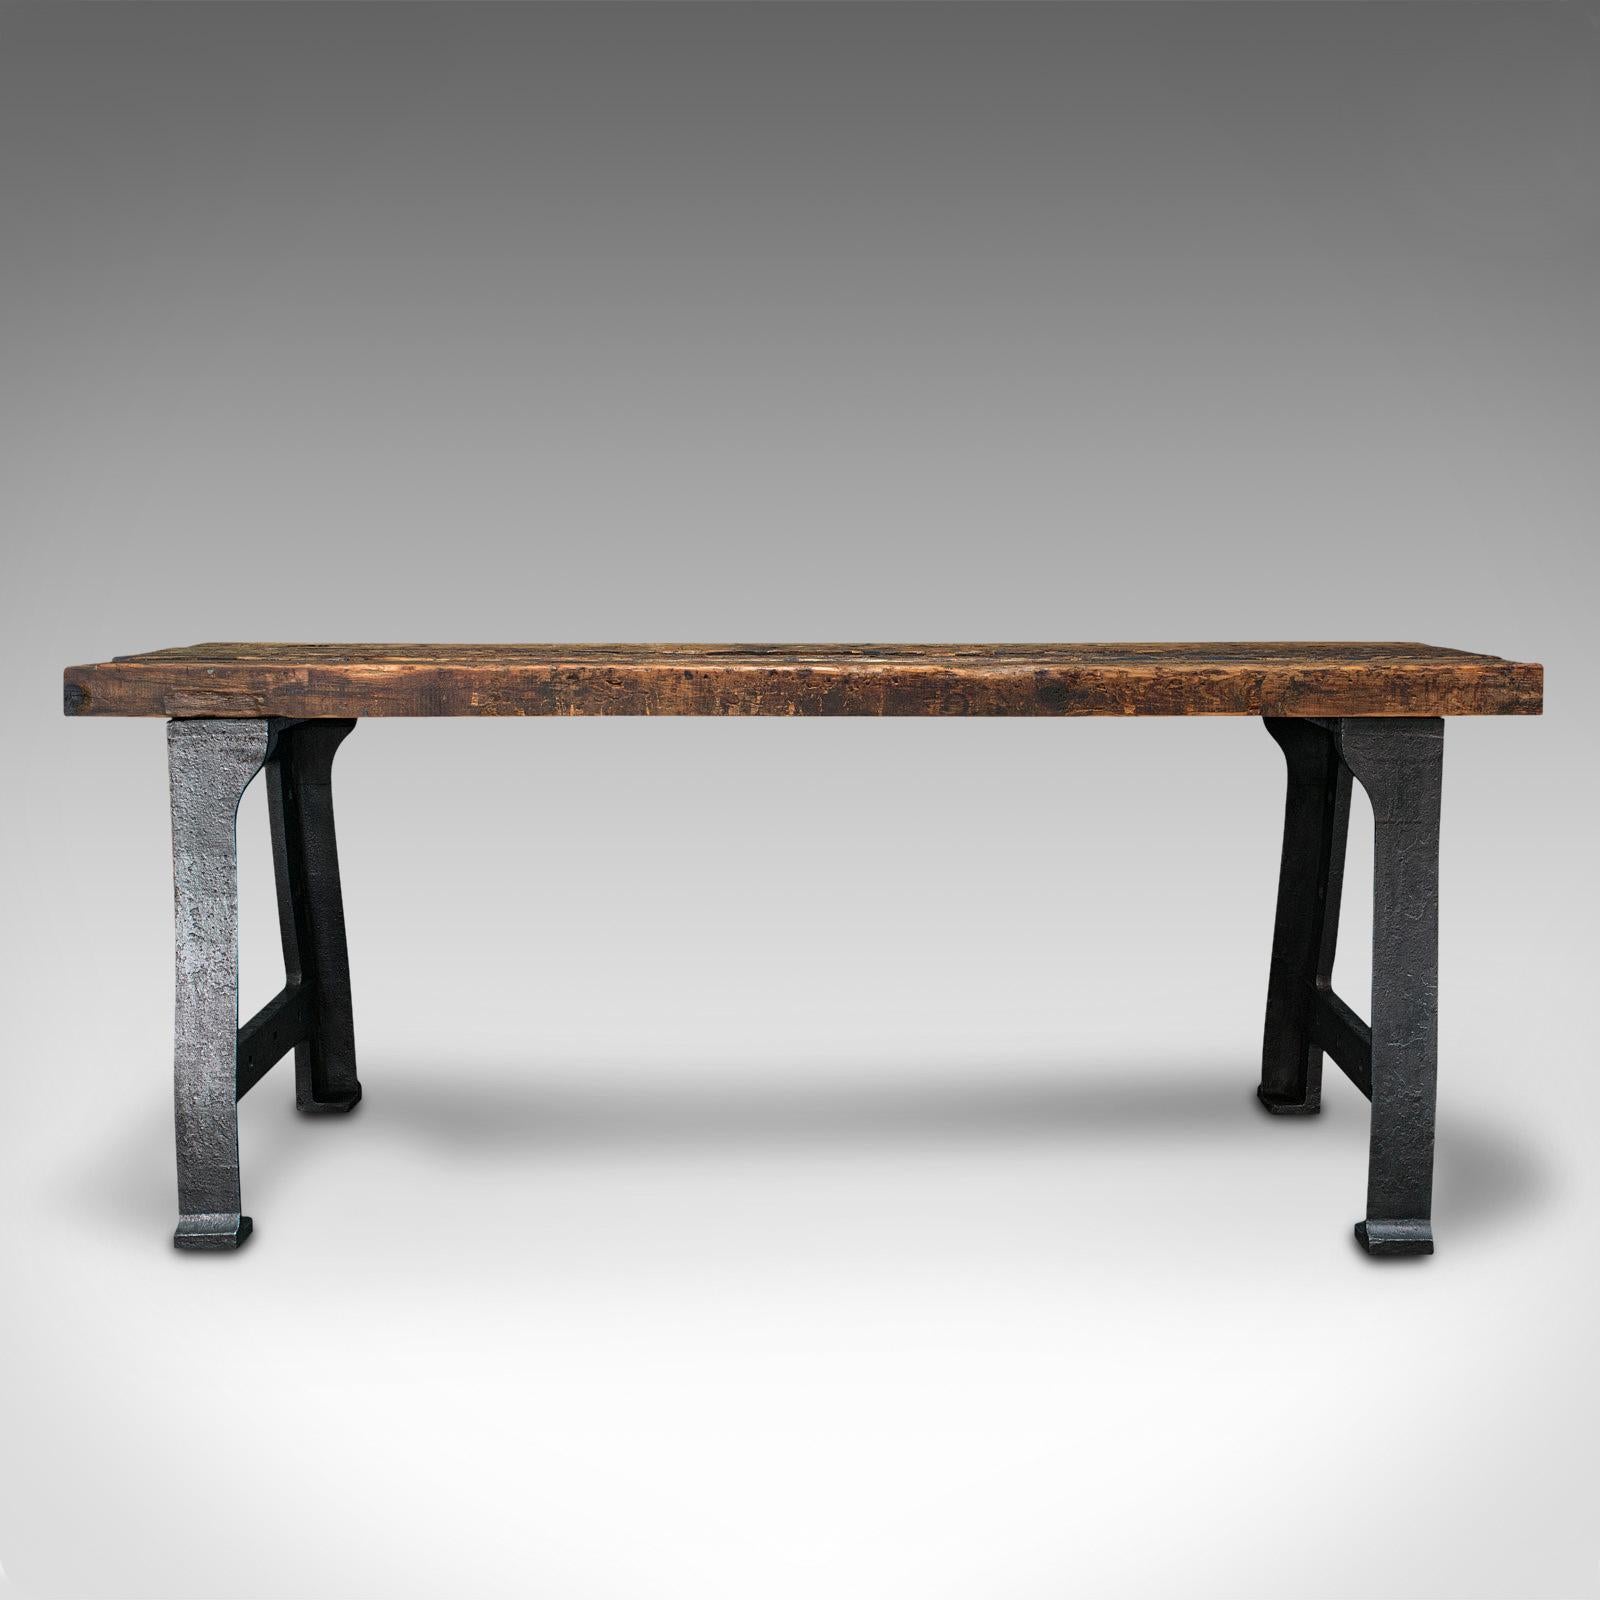 This is an antique foundry table. An English, pine and cast iron heavy centrepiece table of superb industrial taste, dating to the early Victorian period, circa 1850.

Wearing time-served appeal with aplomb and wonderfully robust
Displays a